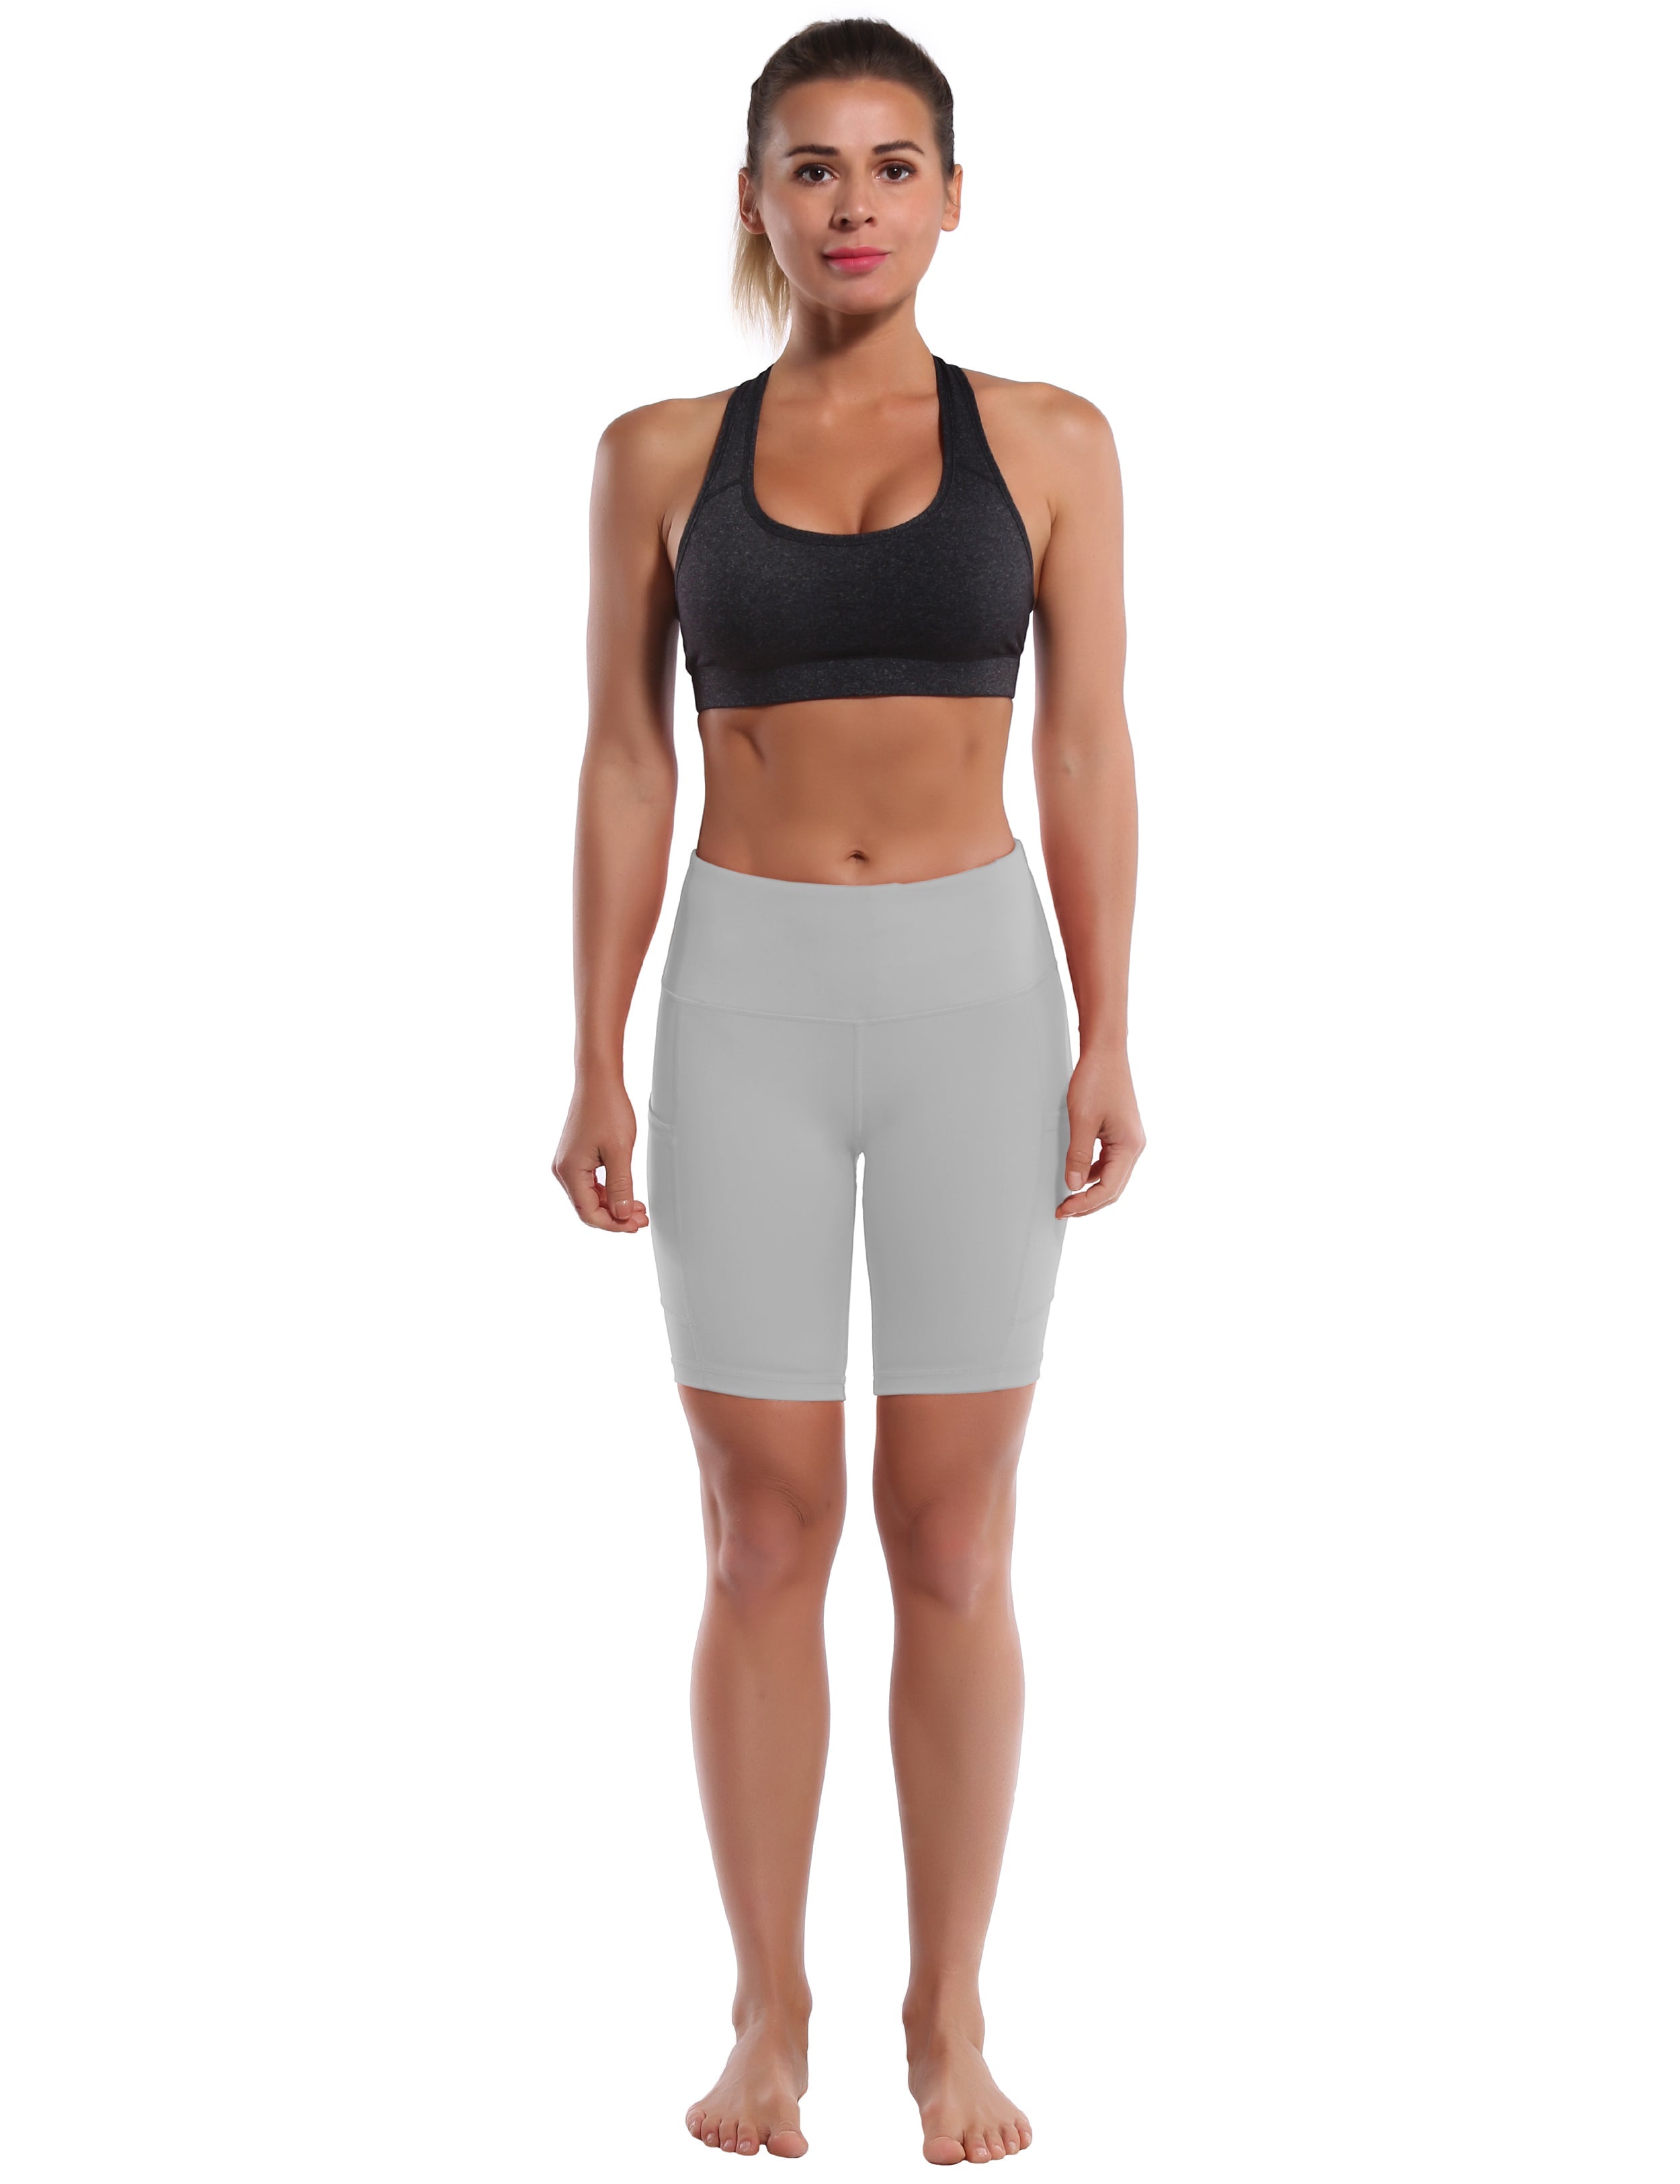 8" Side Pockets Biking Shorts lightgray Sleek, soft, smooth and totally comfortable: our newest style is here. Softest-ever fabric High elasticity High density 4-way stretch Fabric doesn't attract lint easily No see-through Moisture-wicking Machine wash 75% Nylon, 25% Spandex